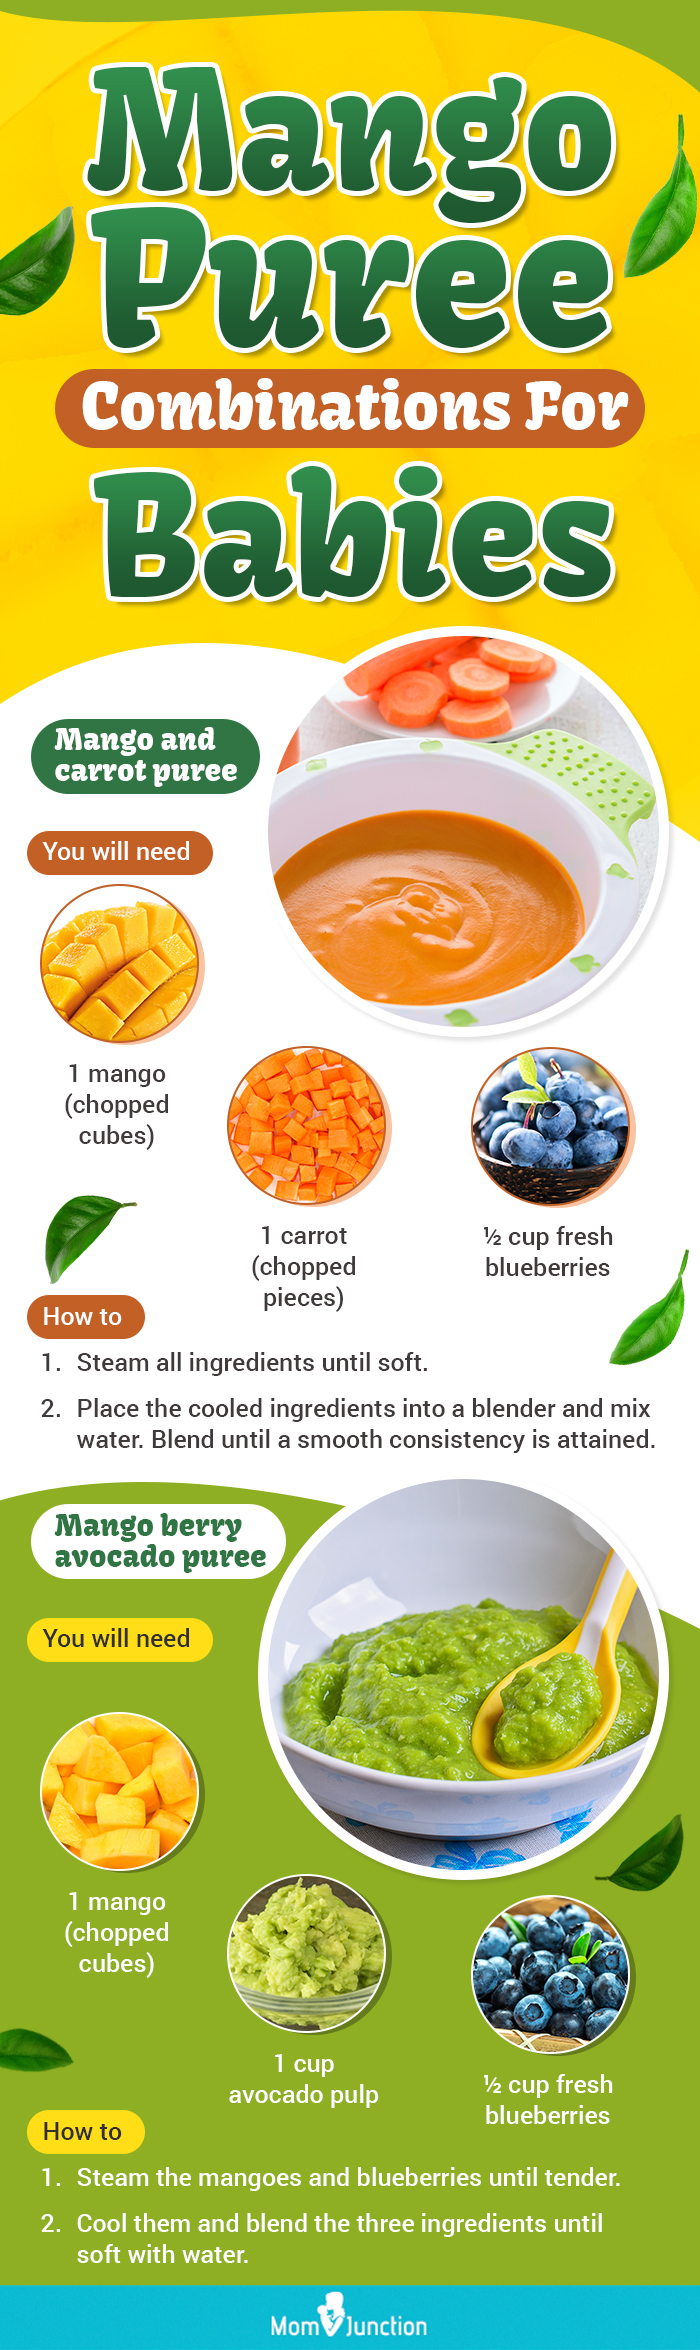 mango puree combinations for babies (infographic)